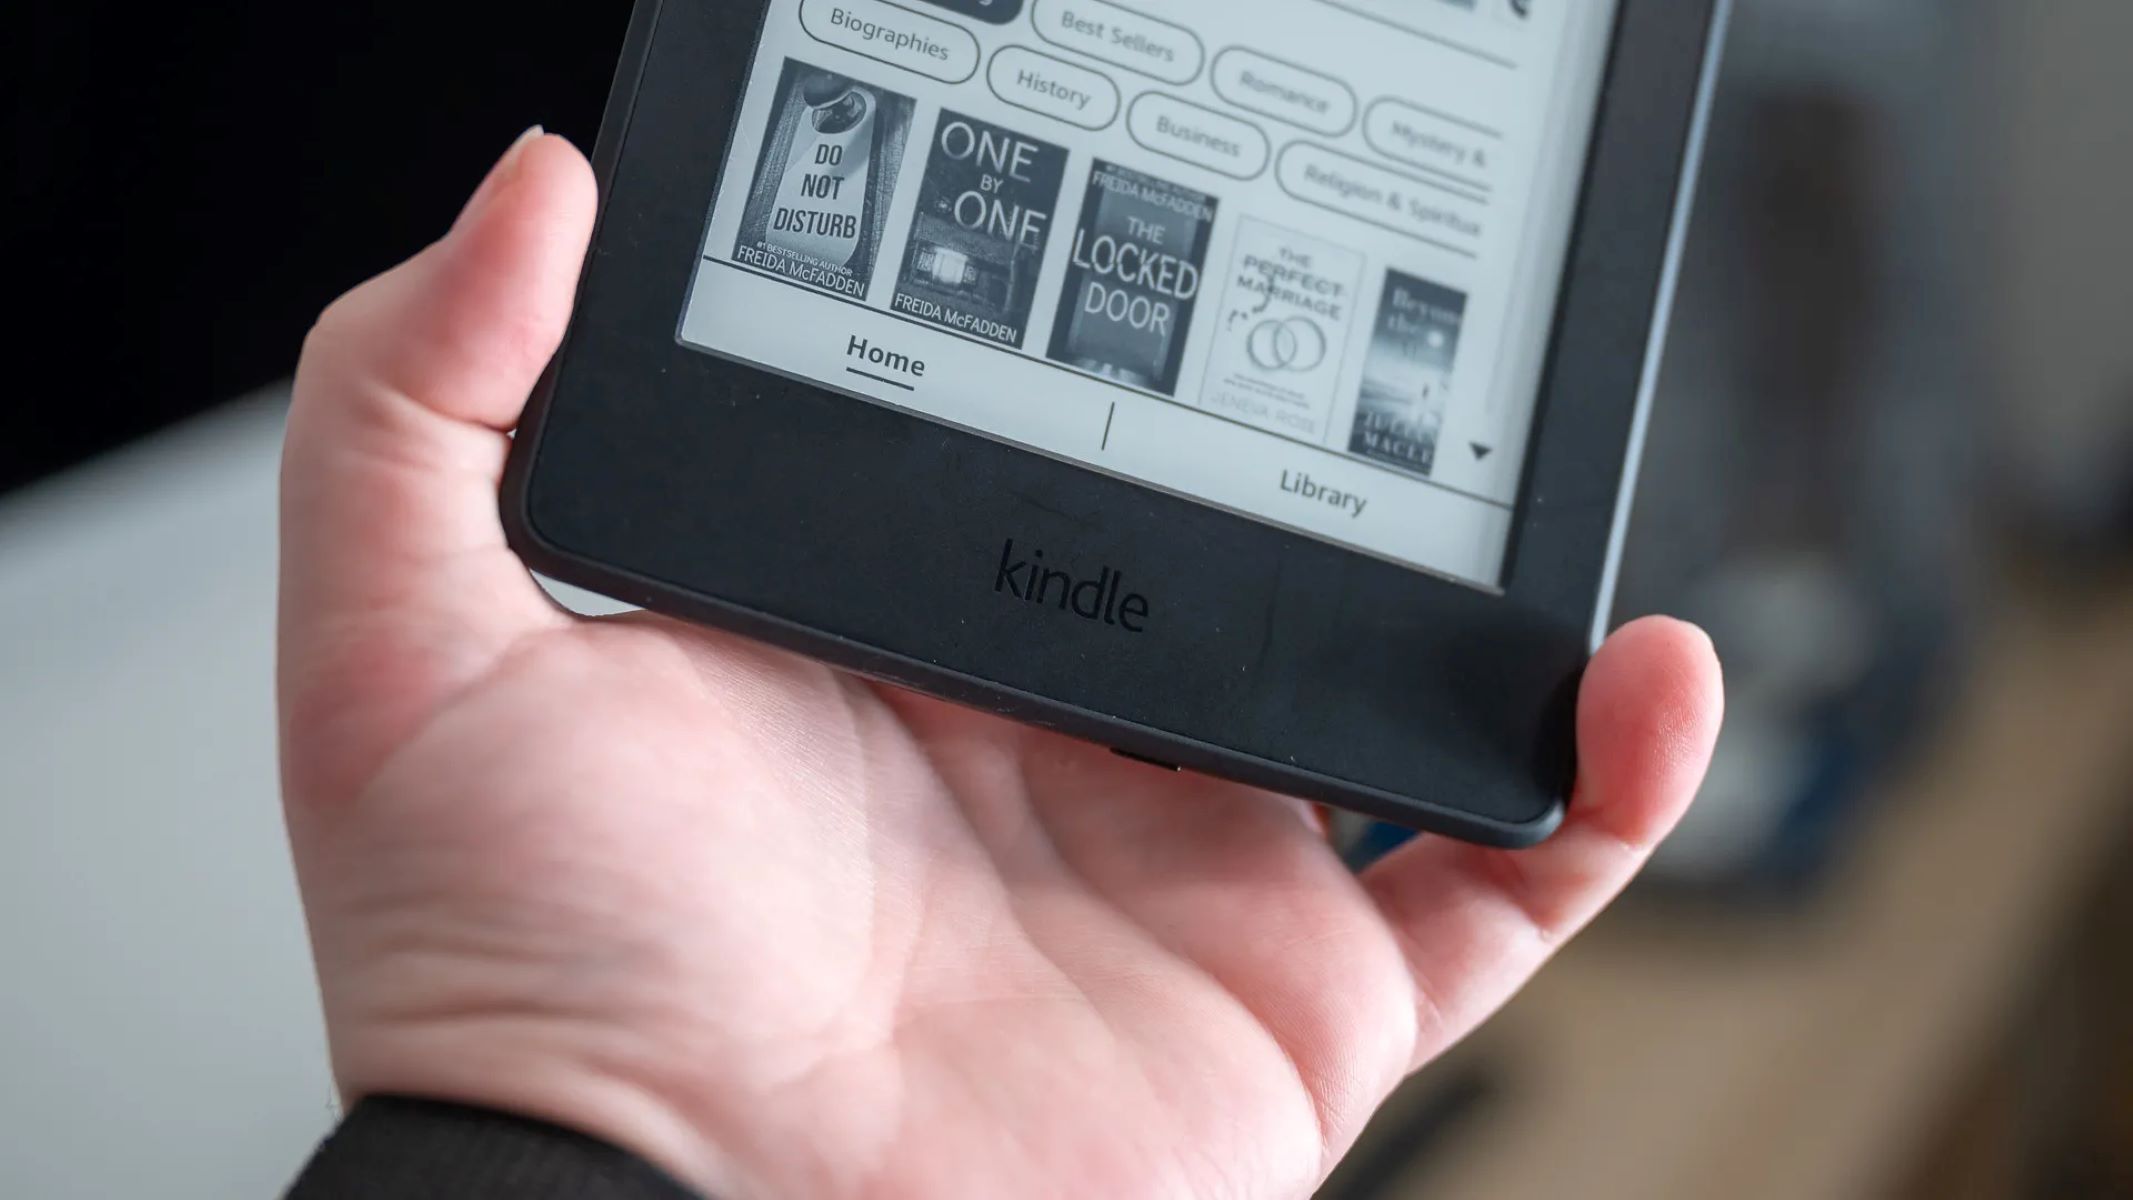 How To Email Books To Kindle